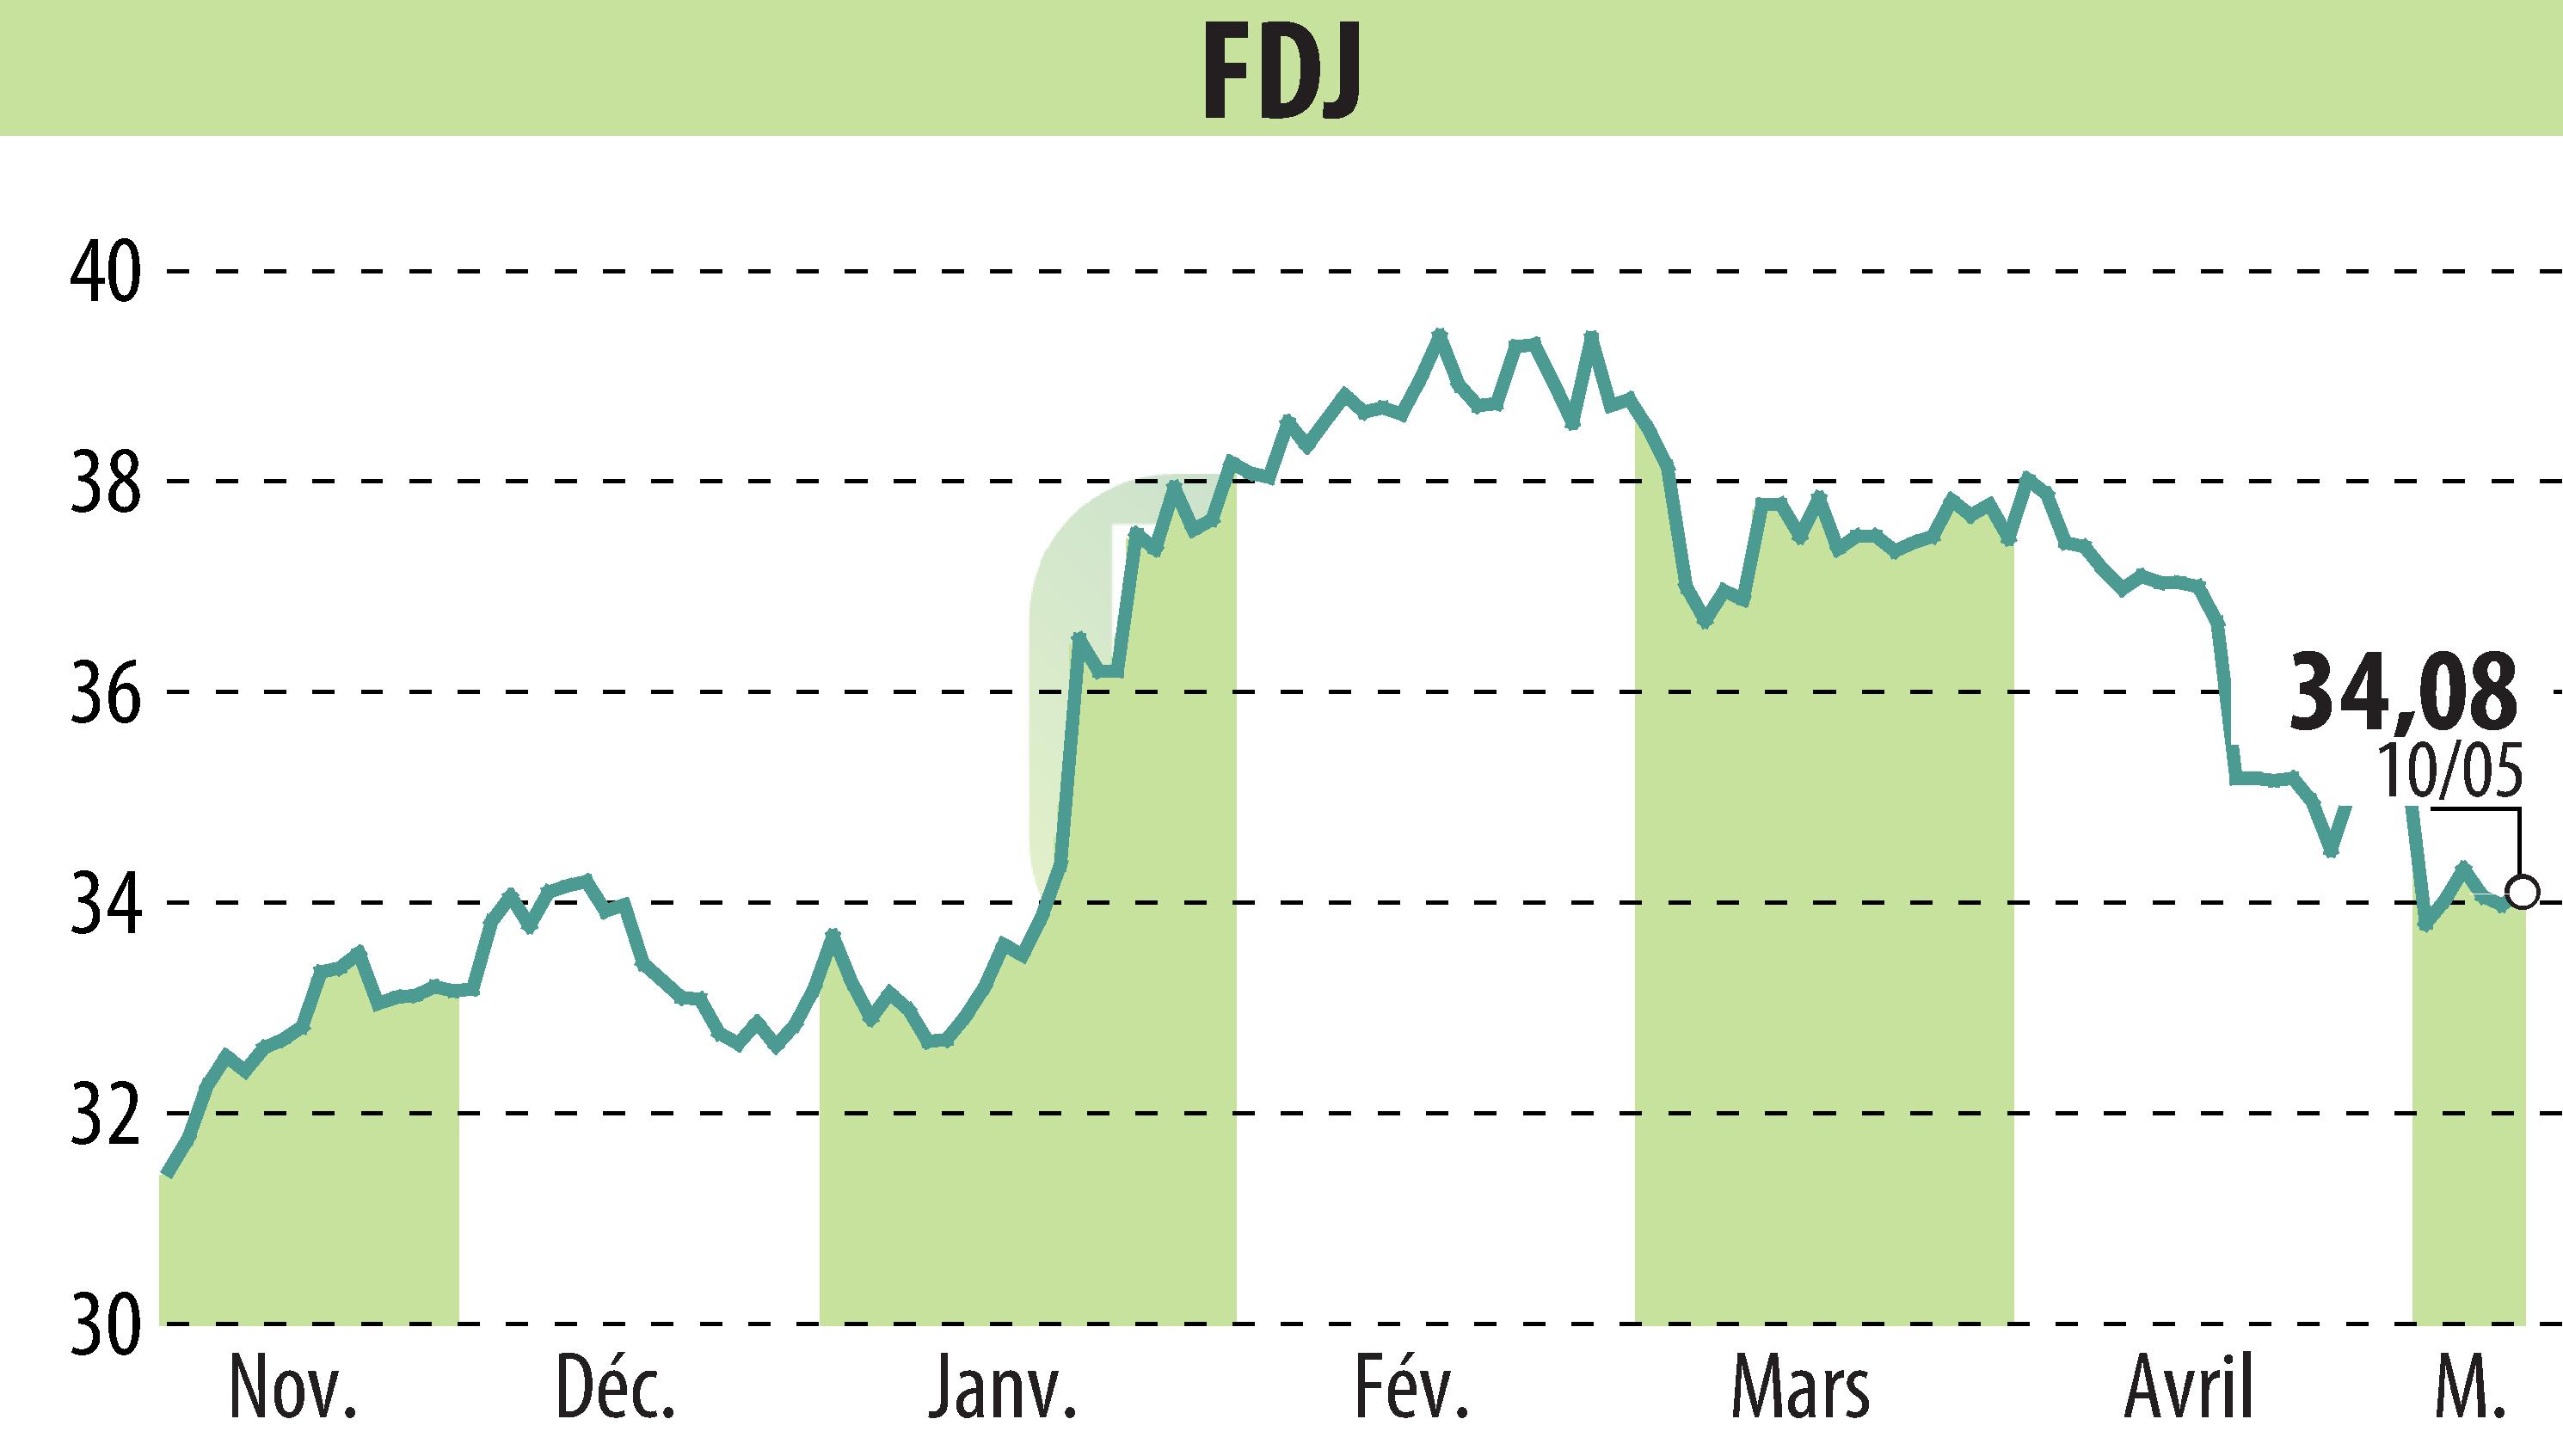 Stock price chart of FDJ (EPA:FDJ) showing fluctuations.